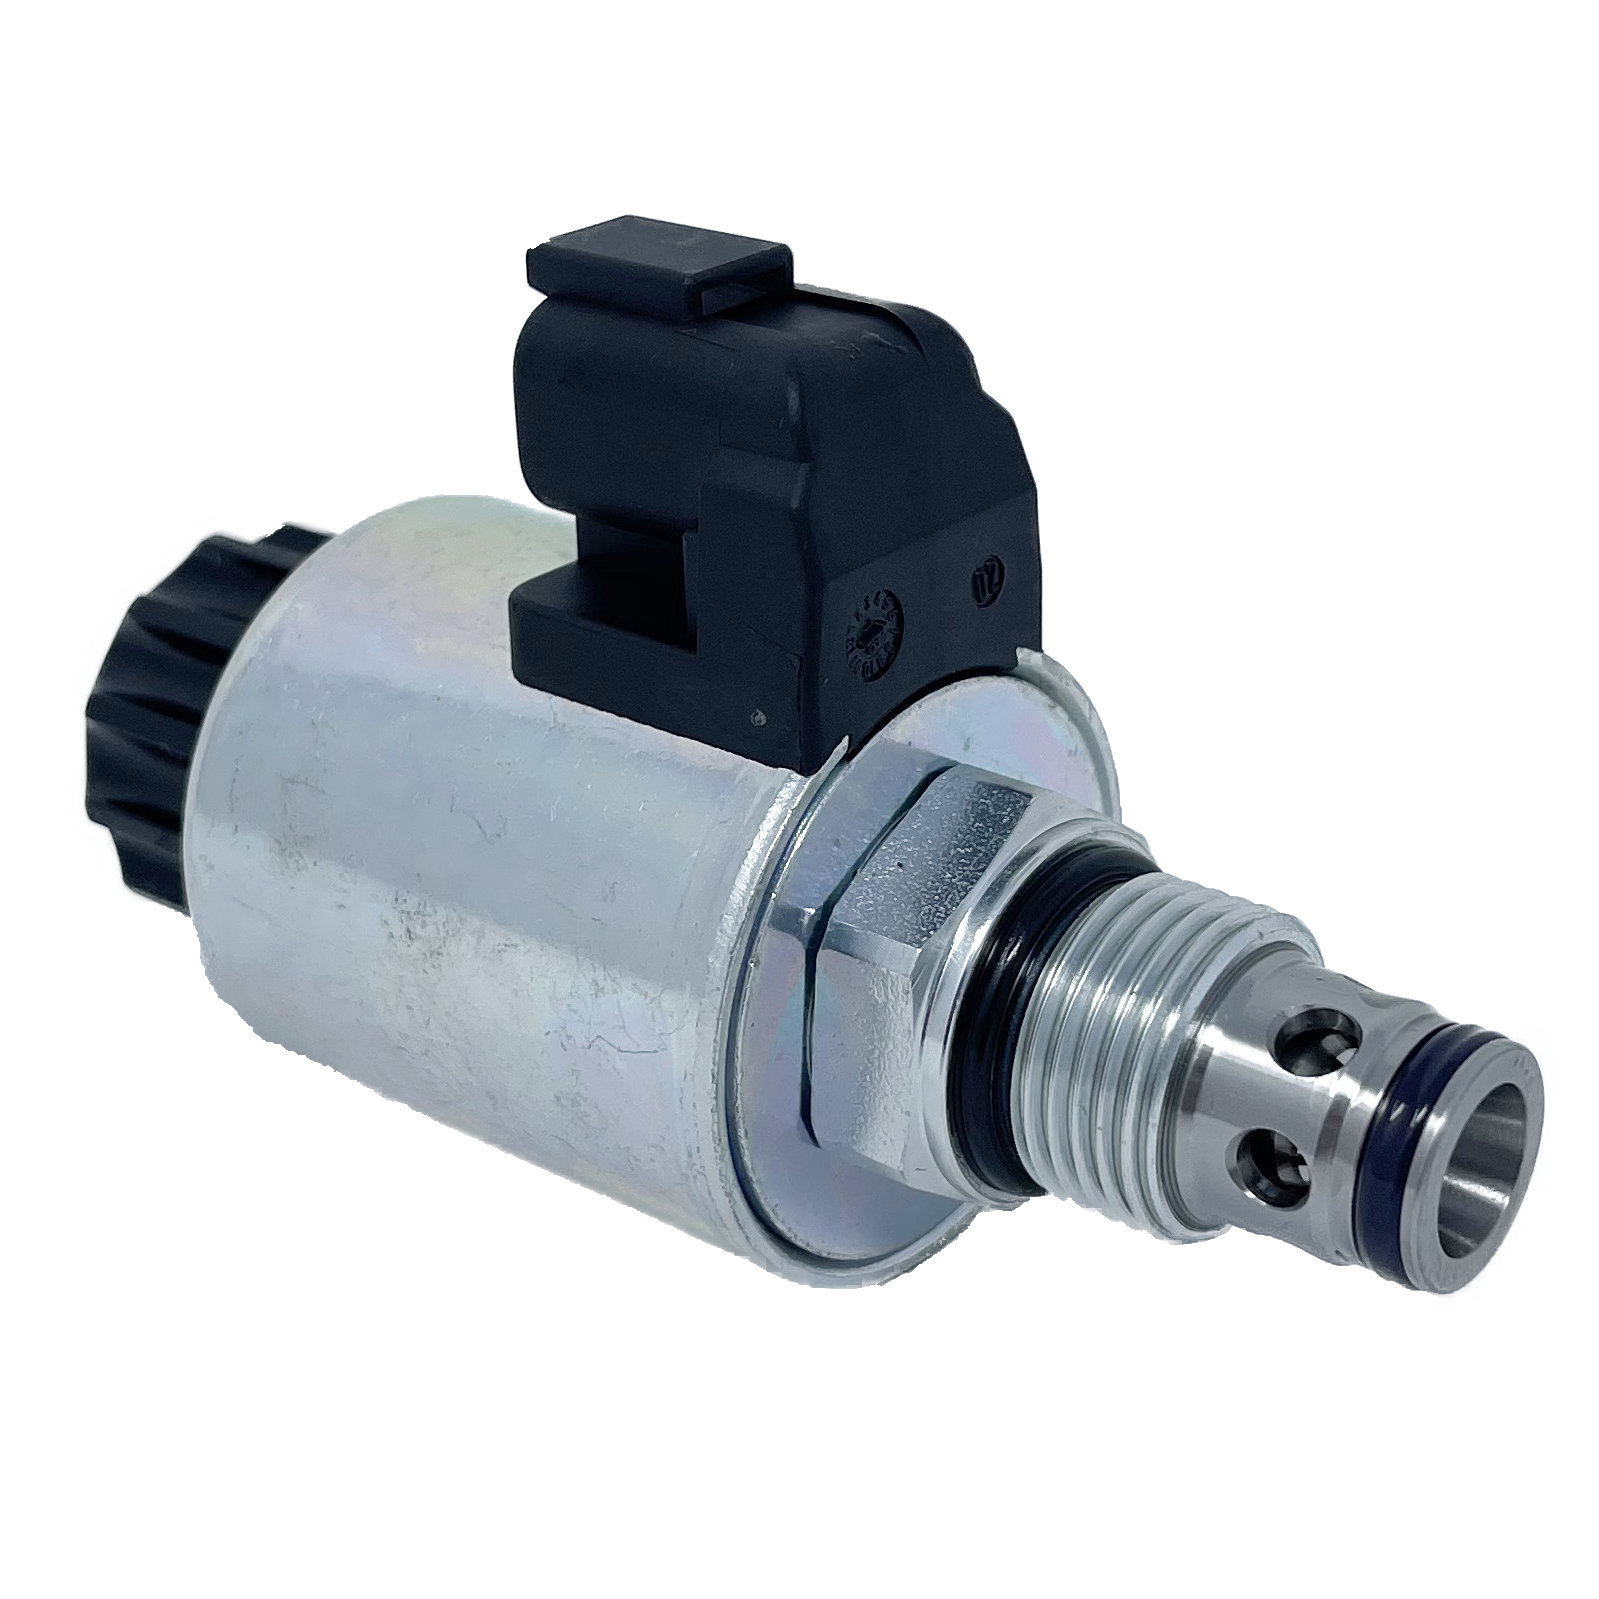 SD3E-B2/H2L2A24DT : Argo DCV, 16GPM, 5100psi, 2P2W, C-10-2, 24 VDC Deutsch, Check 1 to 2 Neutral